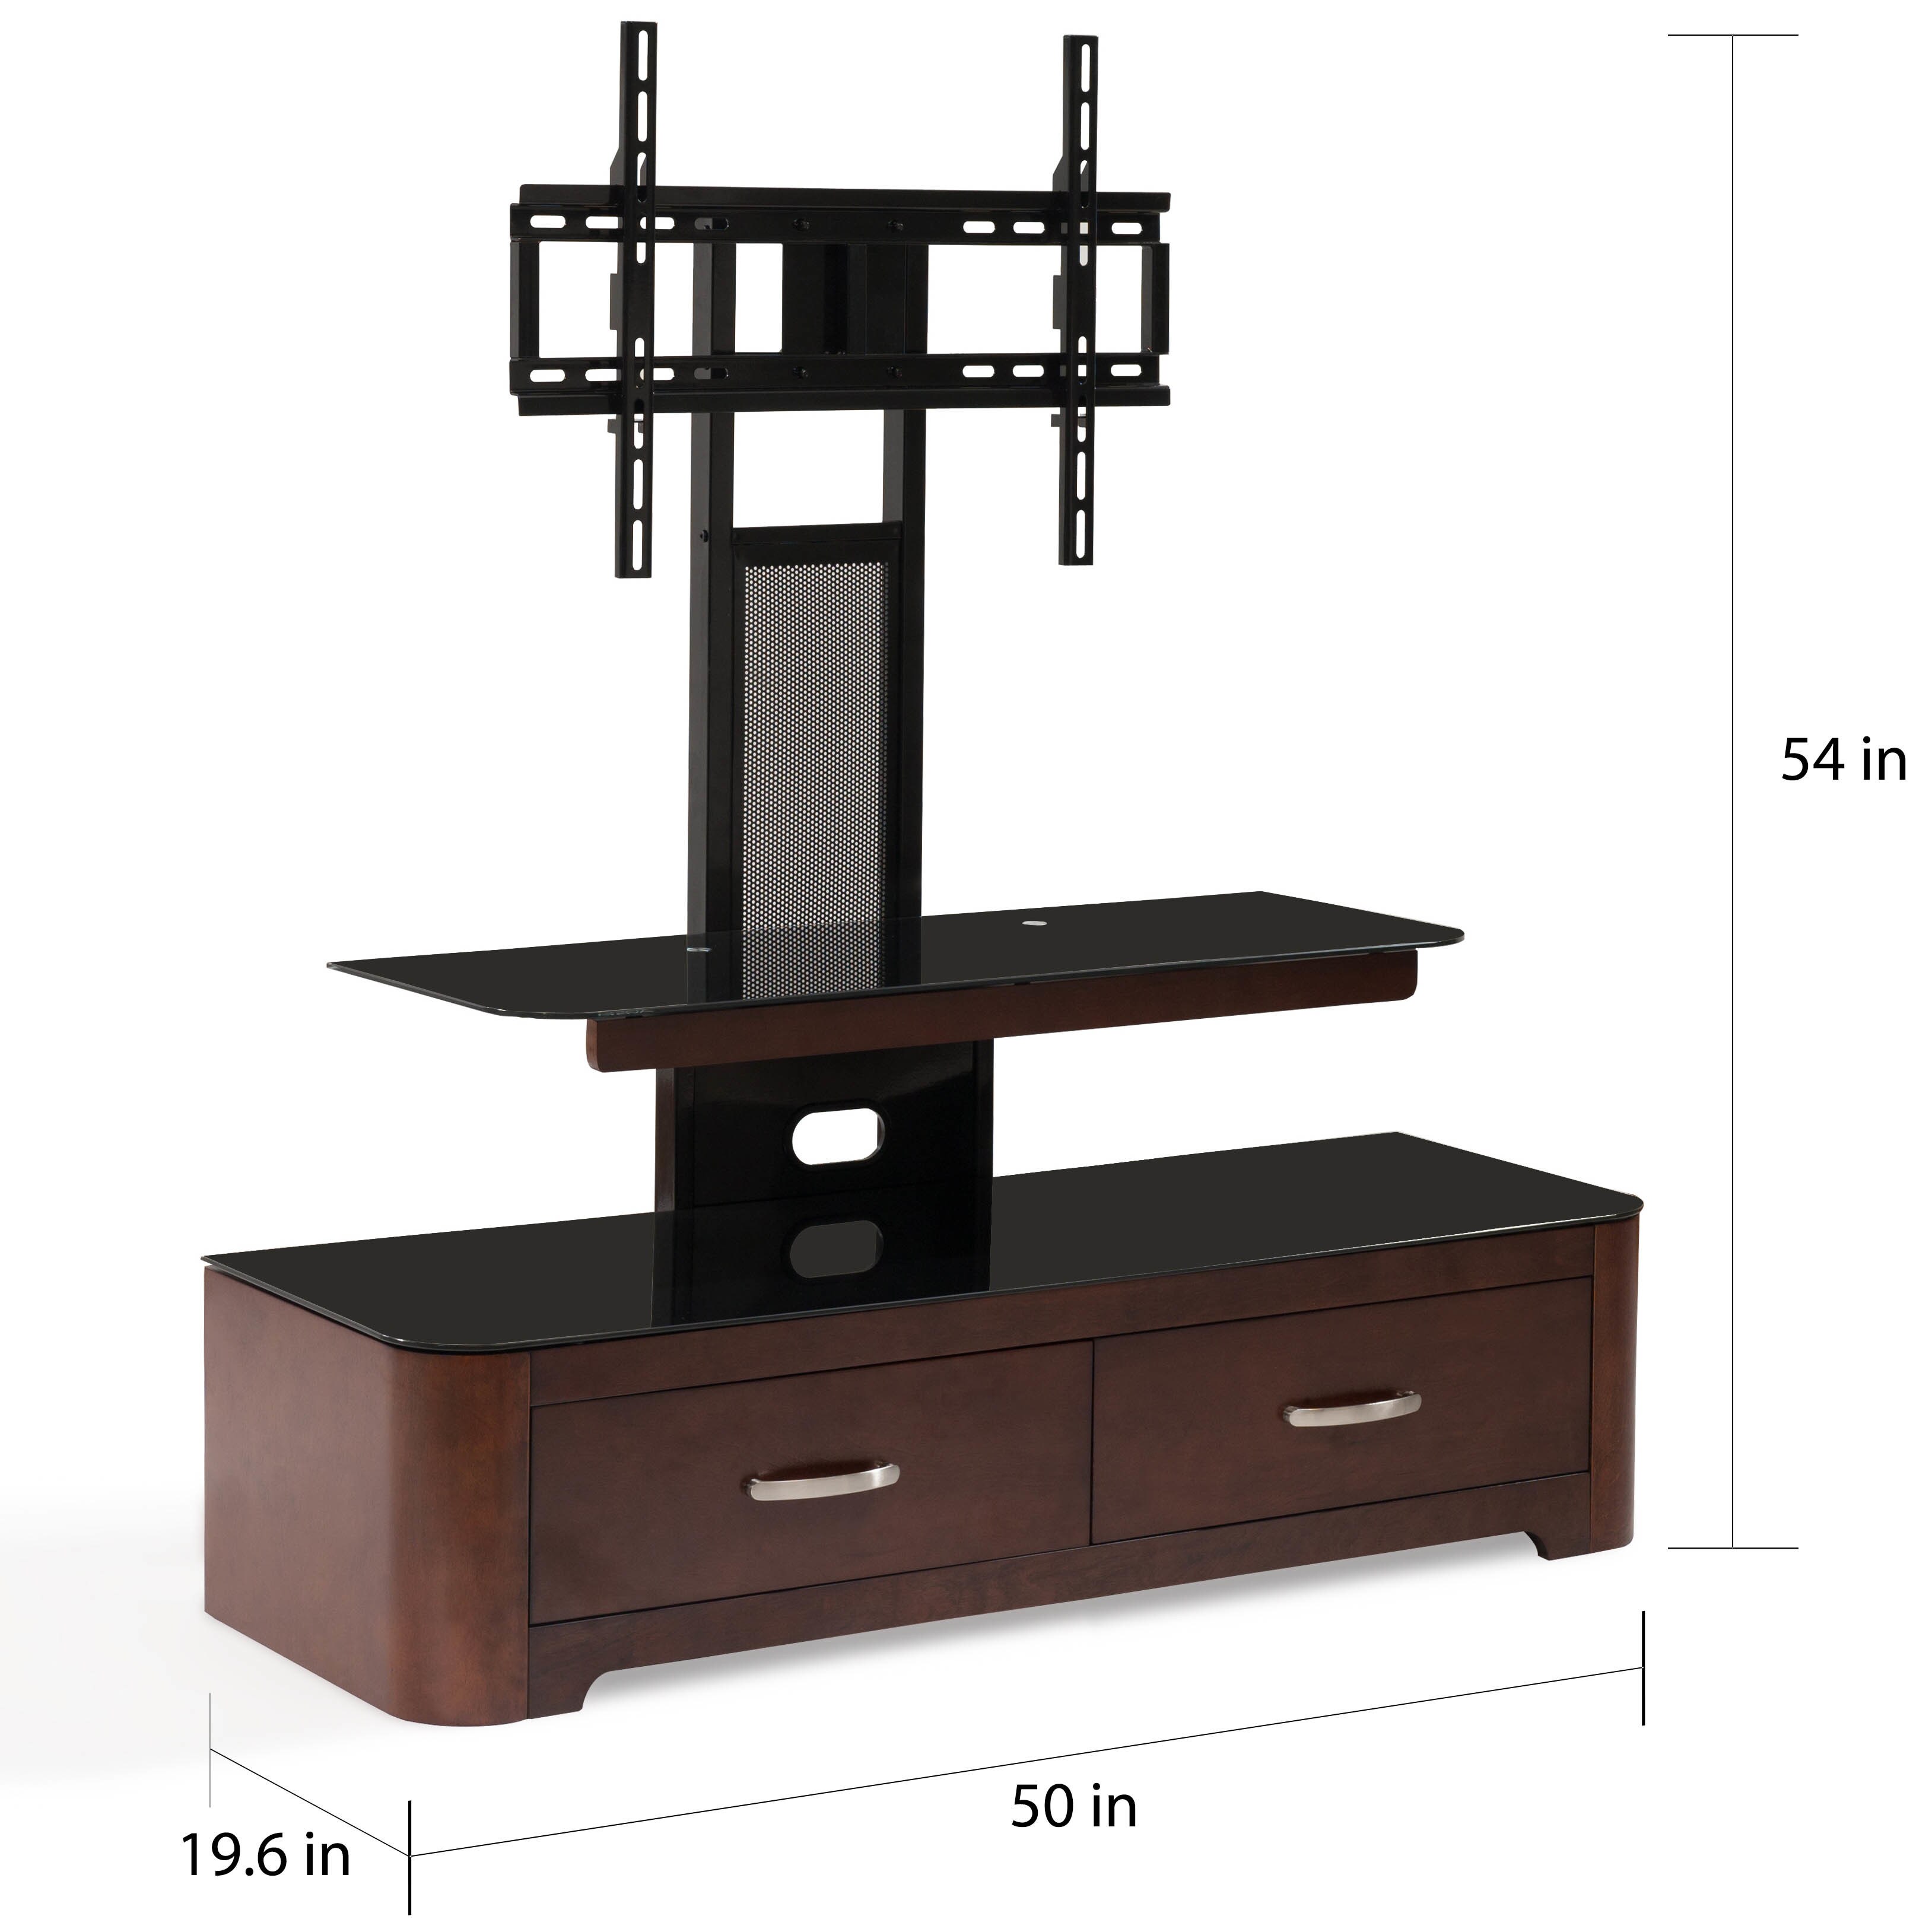 Shop Avista Bellini Tv Stand With Rear Swivel Mount For Up To 130